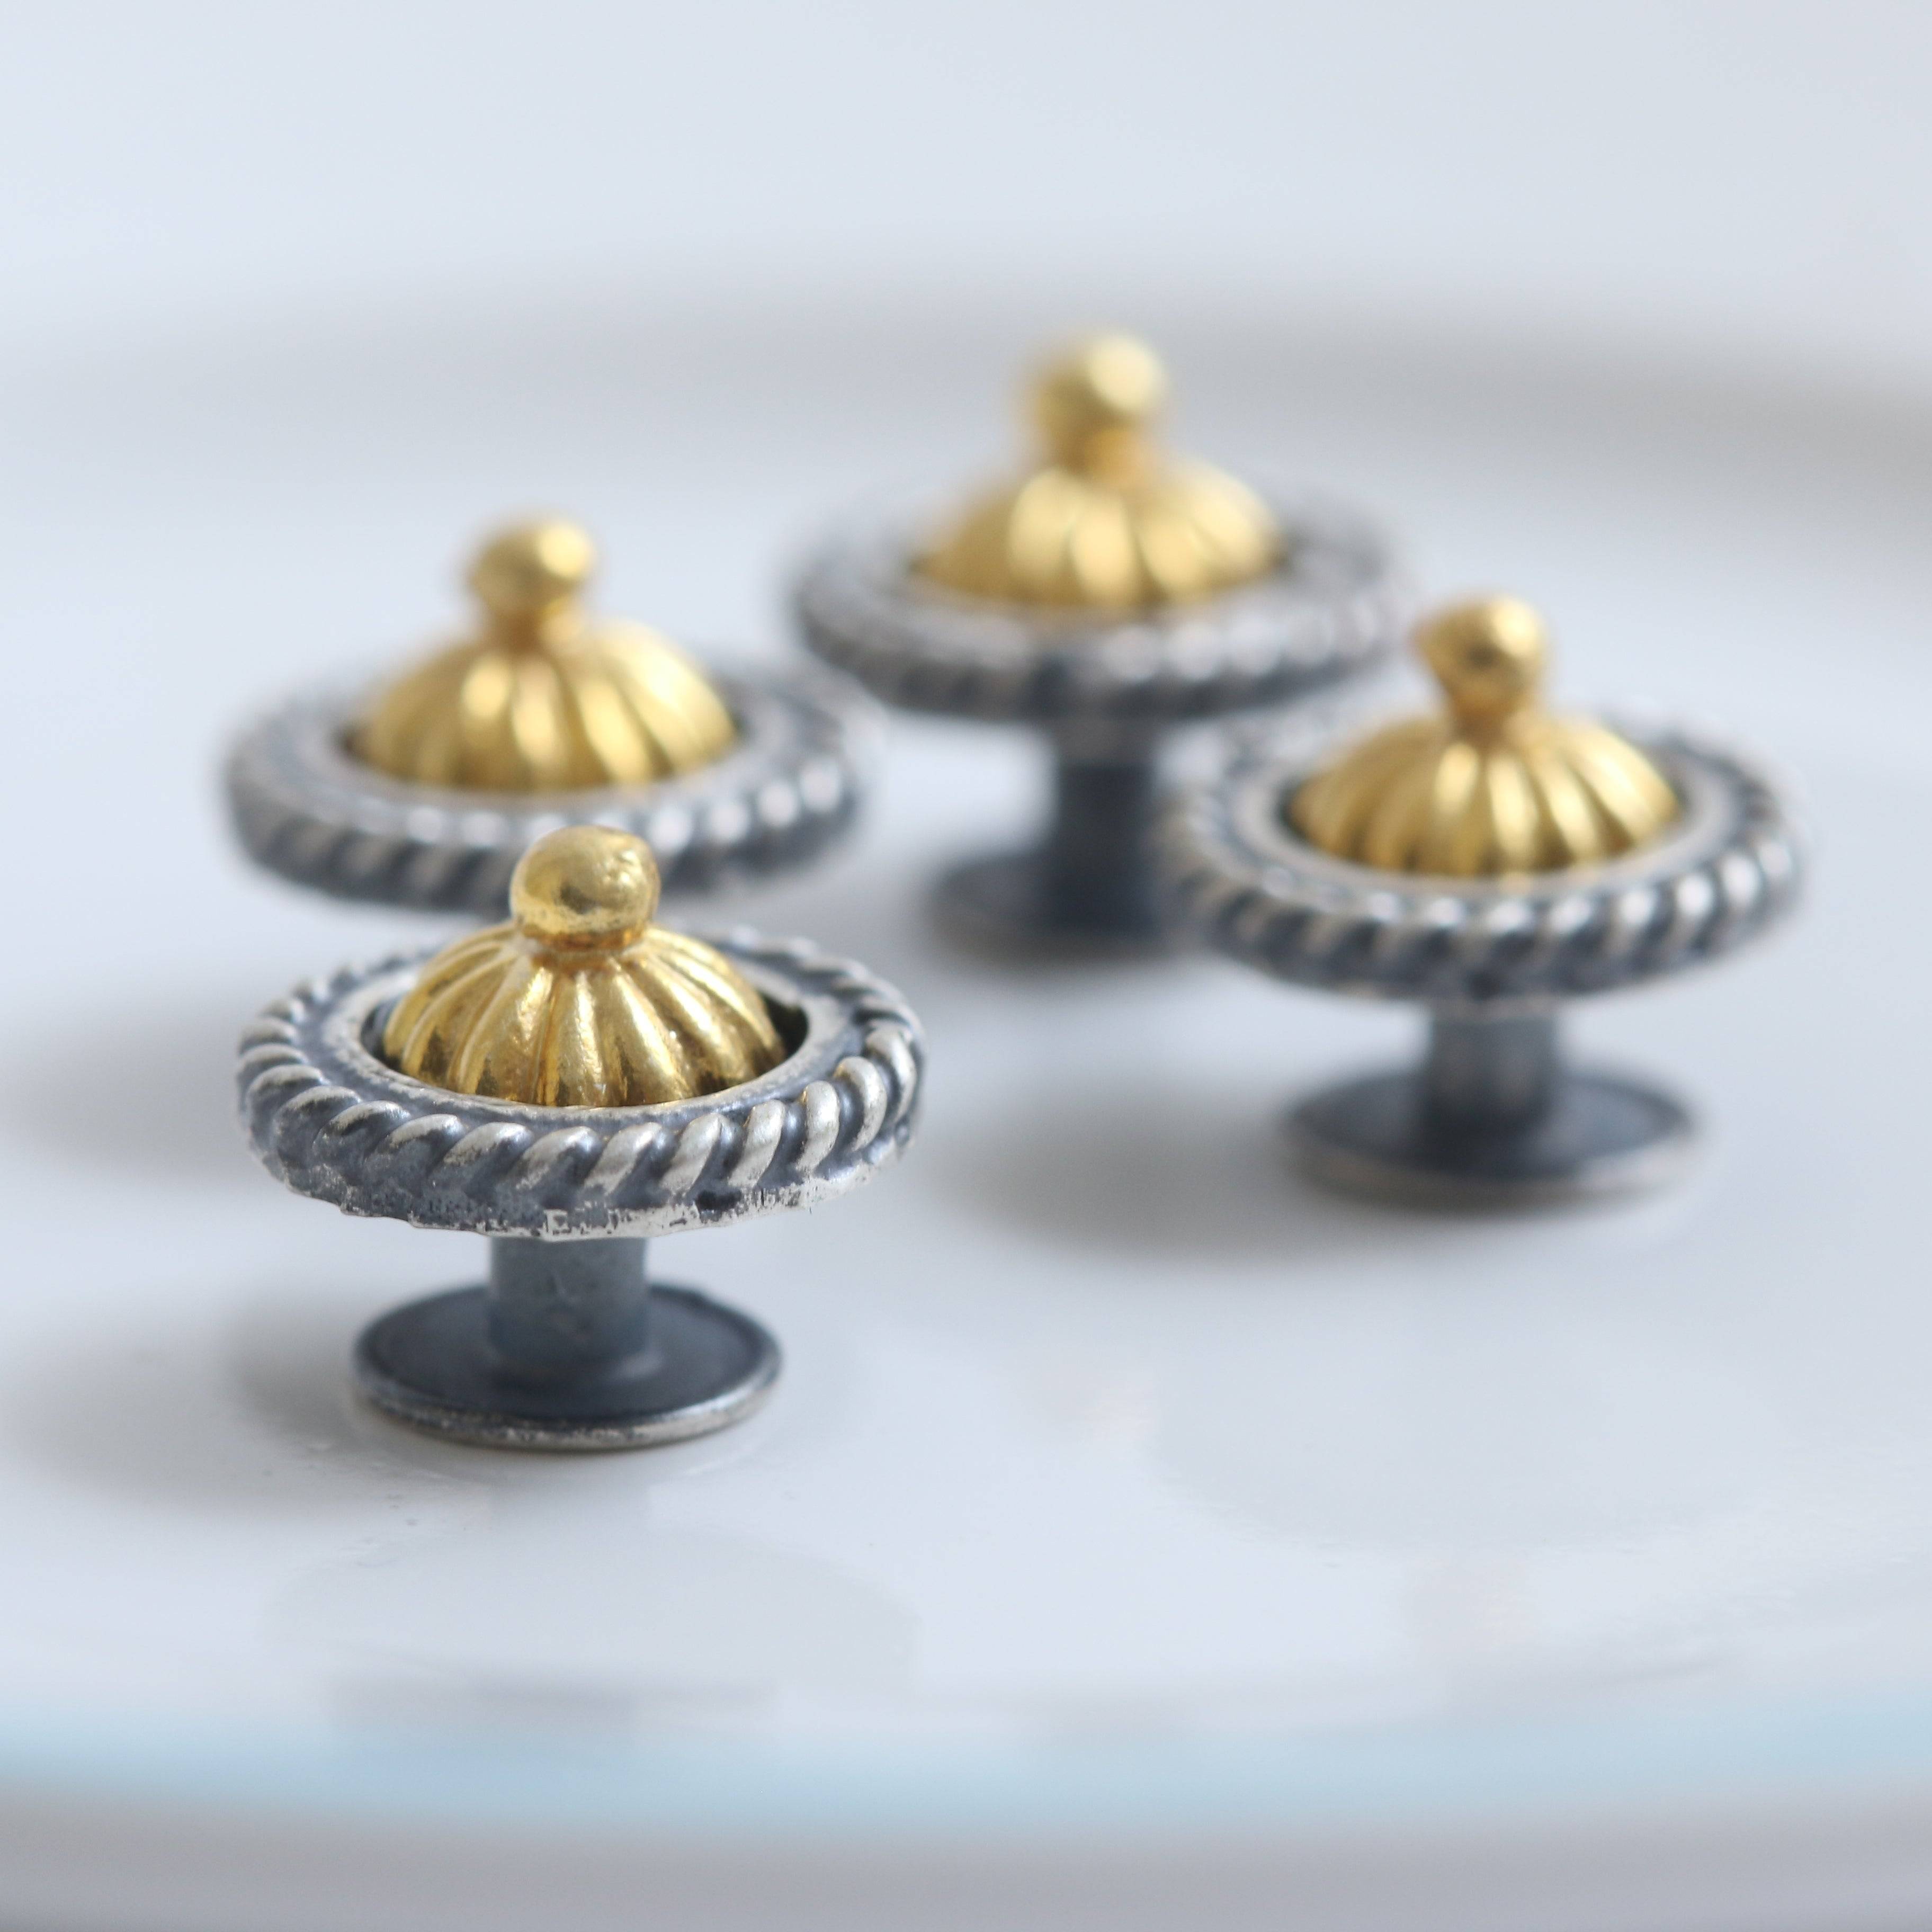 a close up of three metal knobs on a plate